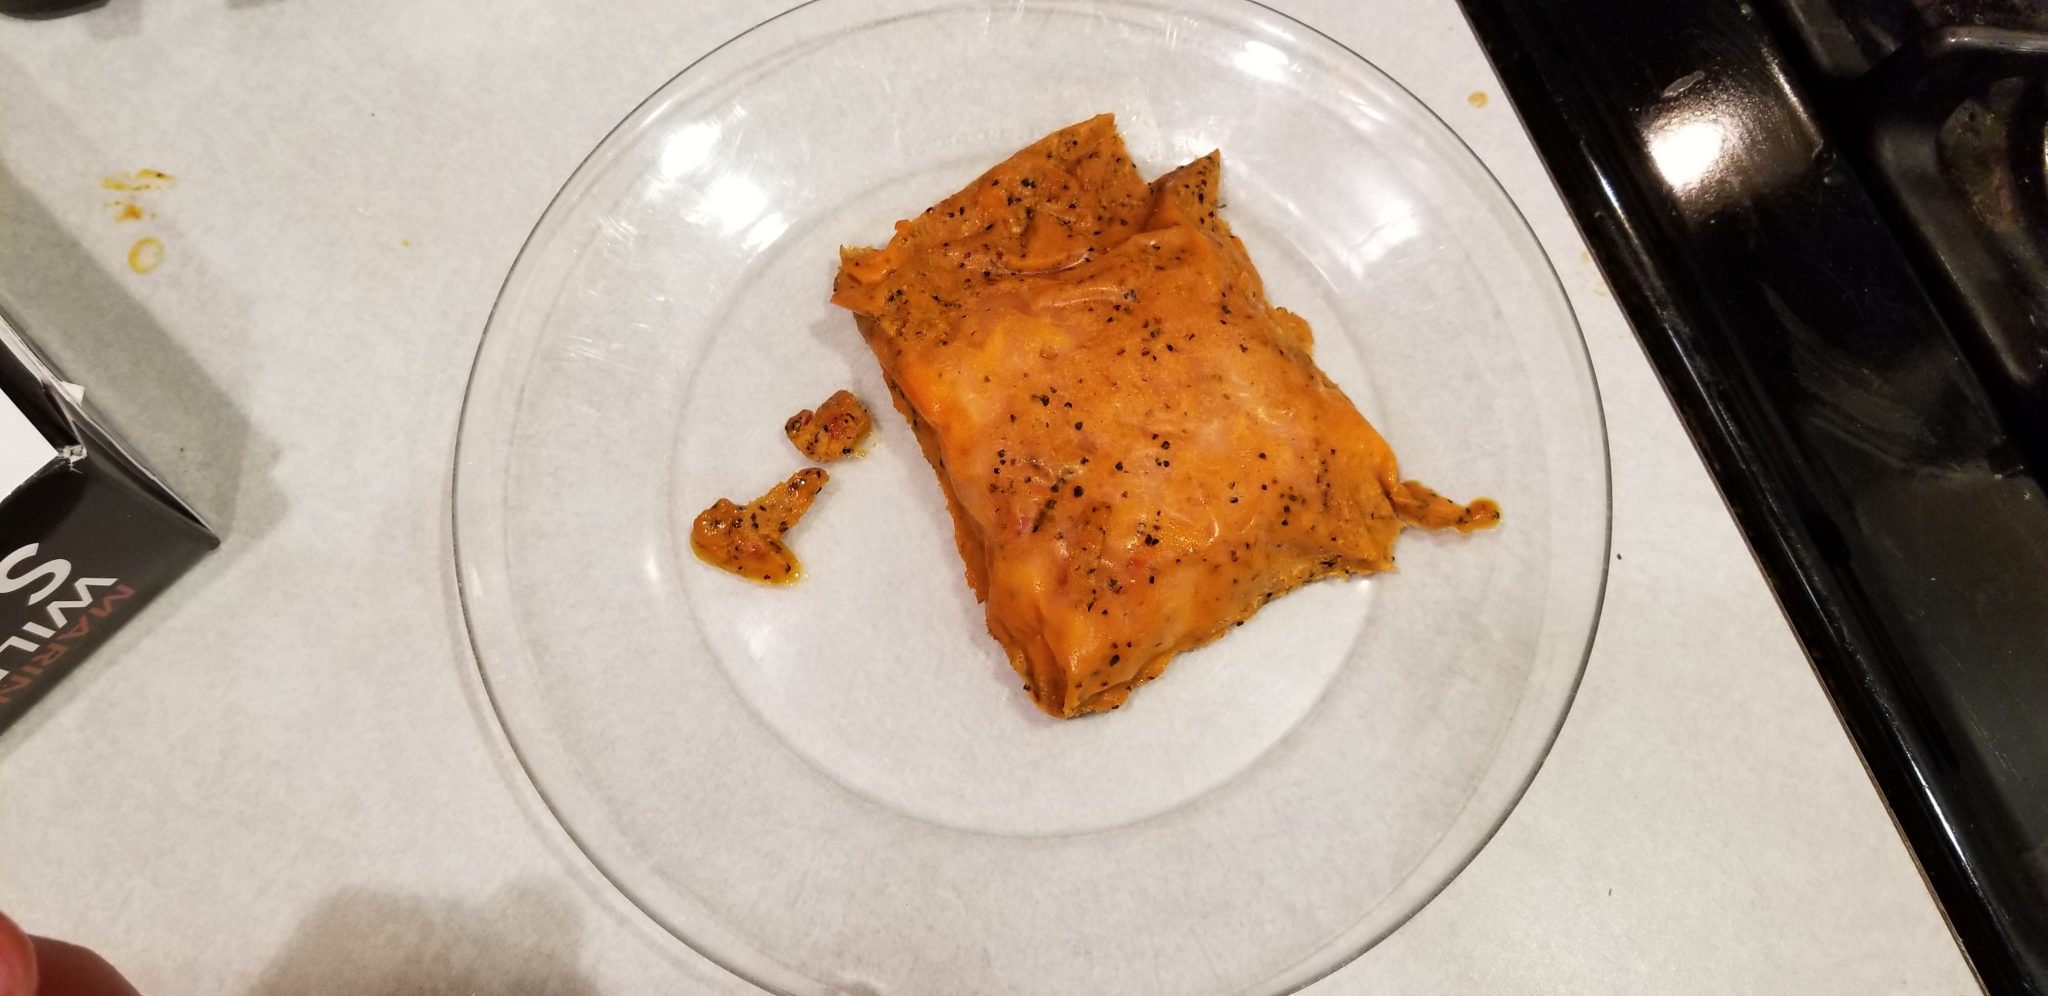 Morey's Wild Caught Salmon on the plate